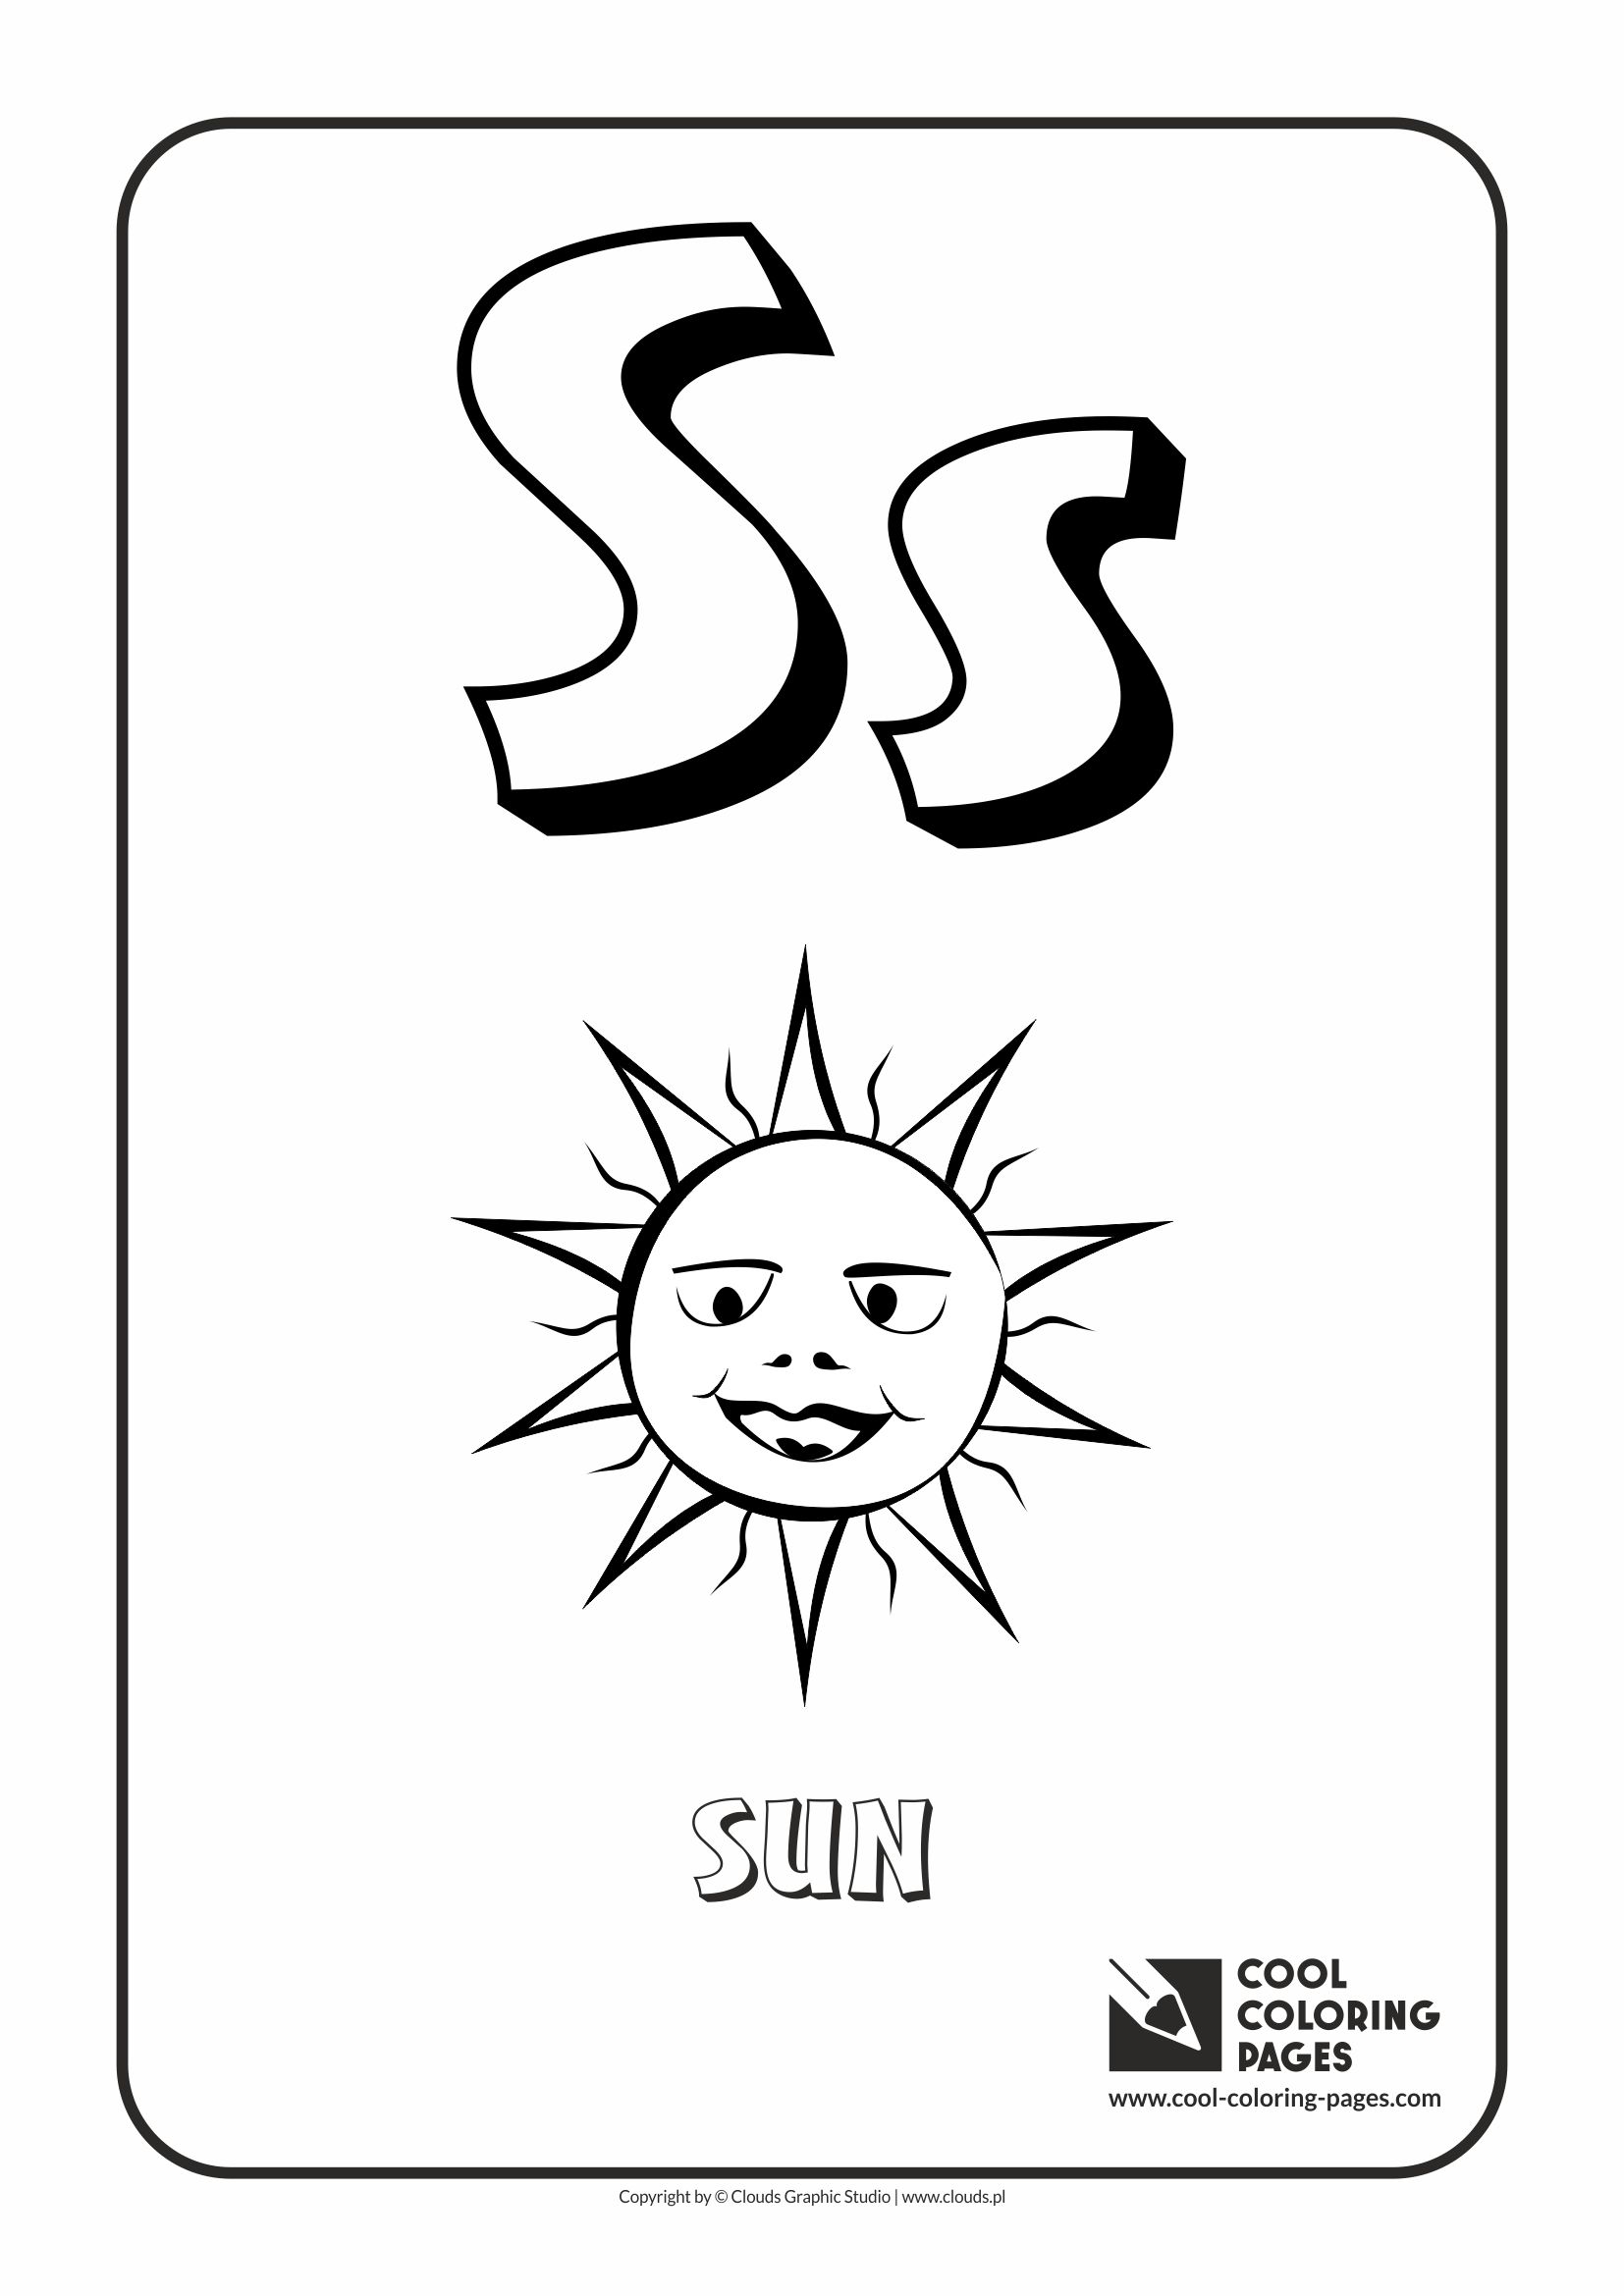 Cool Coloring Pages - Alphabet / Letter S / Coloring page with letter S